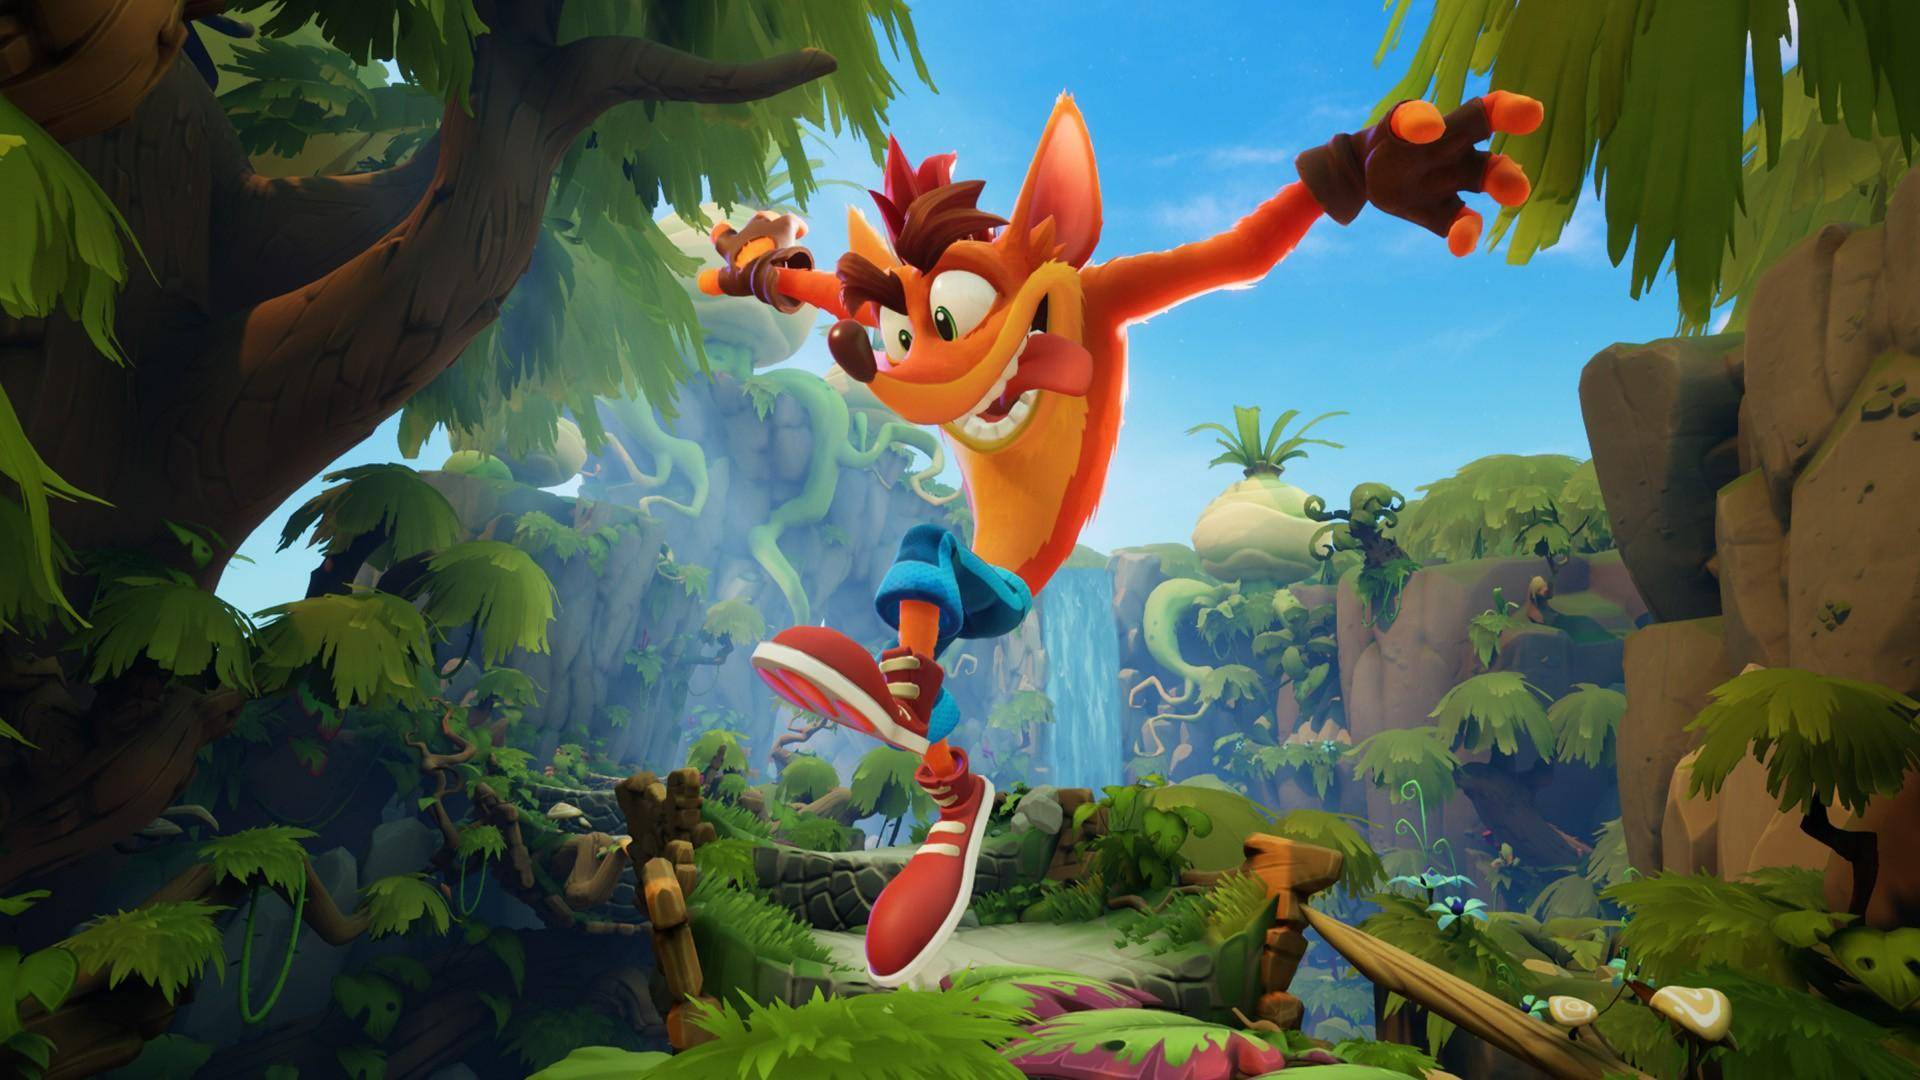 Crash Bandicoot 4: It's About Time shows its gameplay